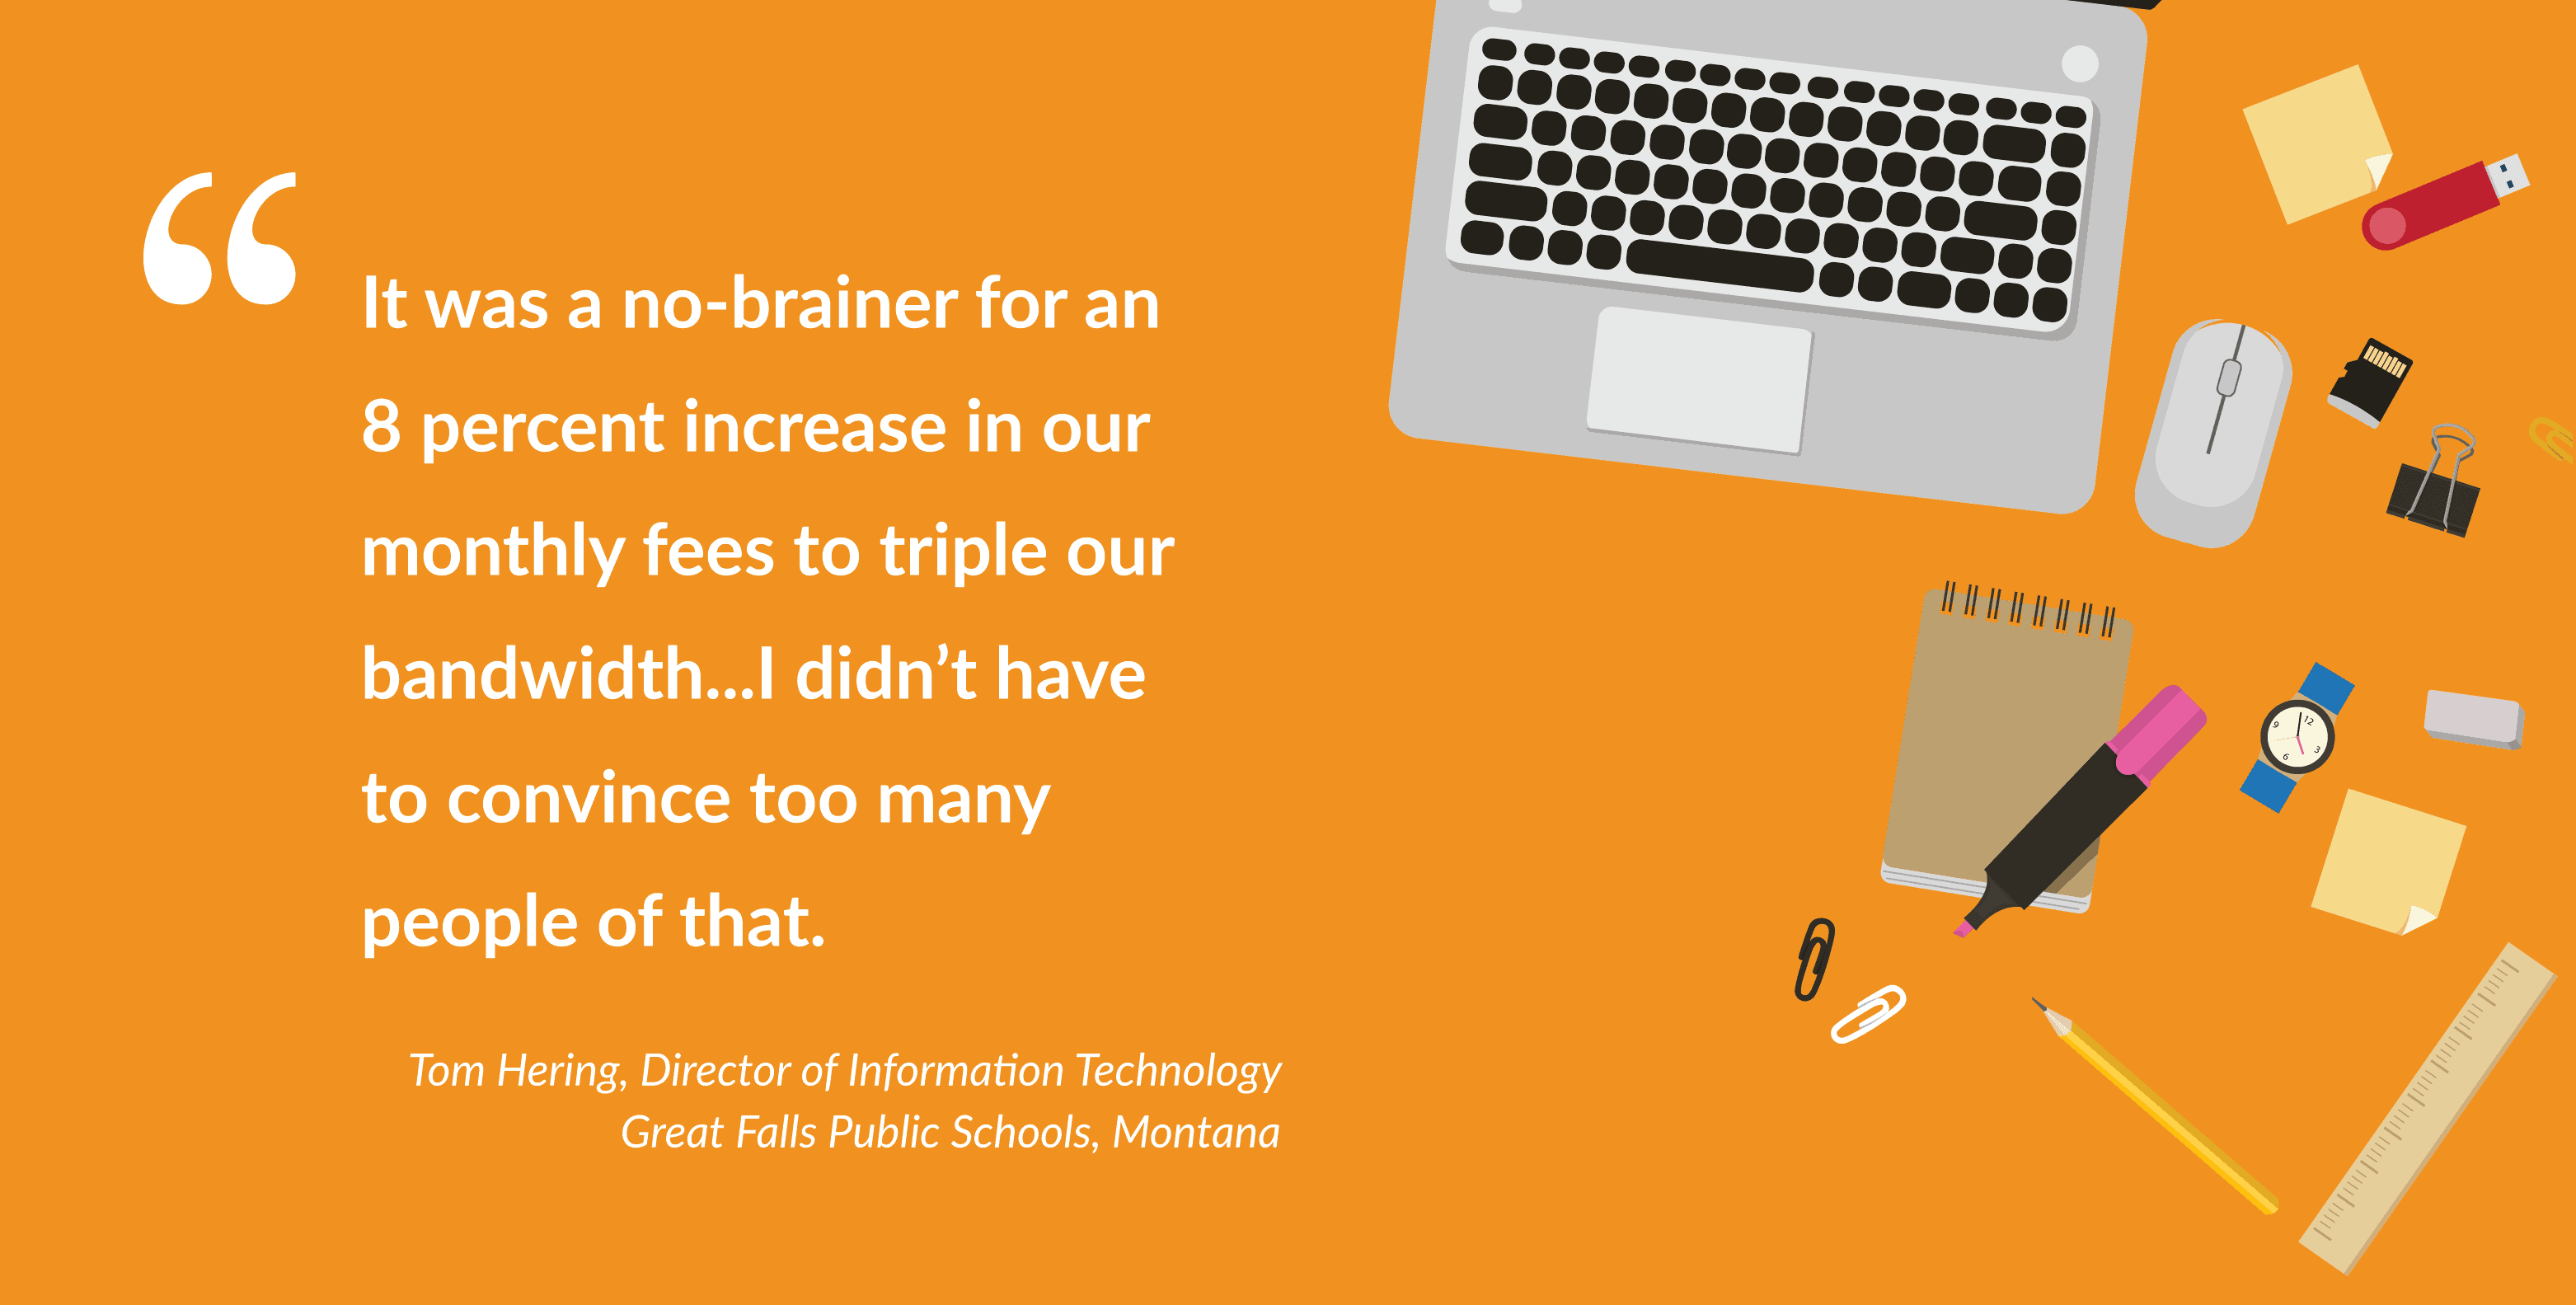 Quote in graphic stating "It was a no-brainer for 8% increase in our monthly fees to triple our bandwidth... I didn't have to convince too many people of that." - Tom Hering, Director of Technology Great Falls Public Schools, Montana